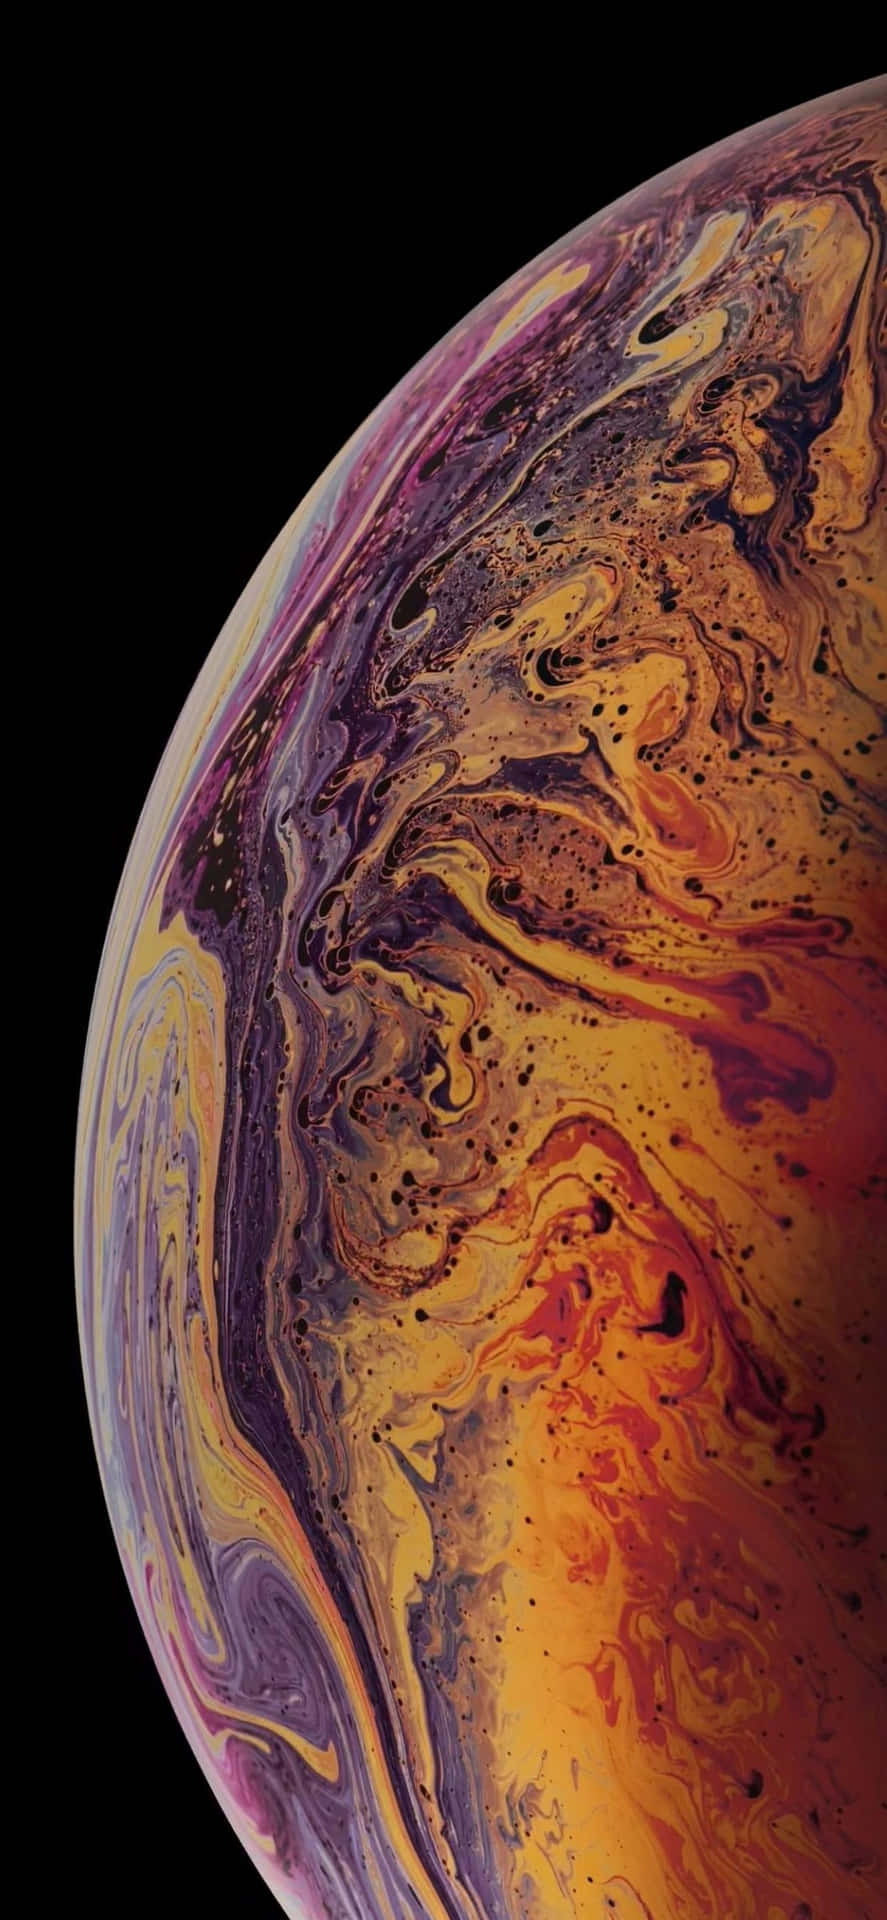 Download Stellar Universe On Iphone Xs Max Screen | Wallpapers.com